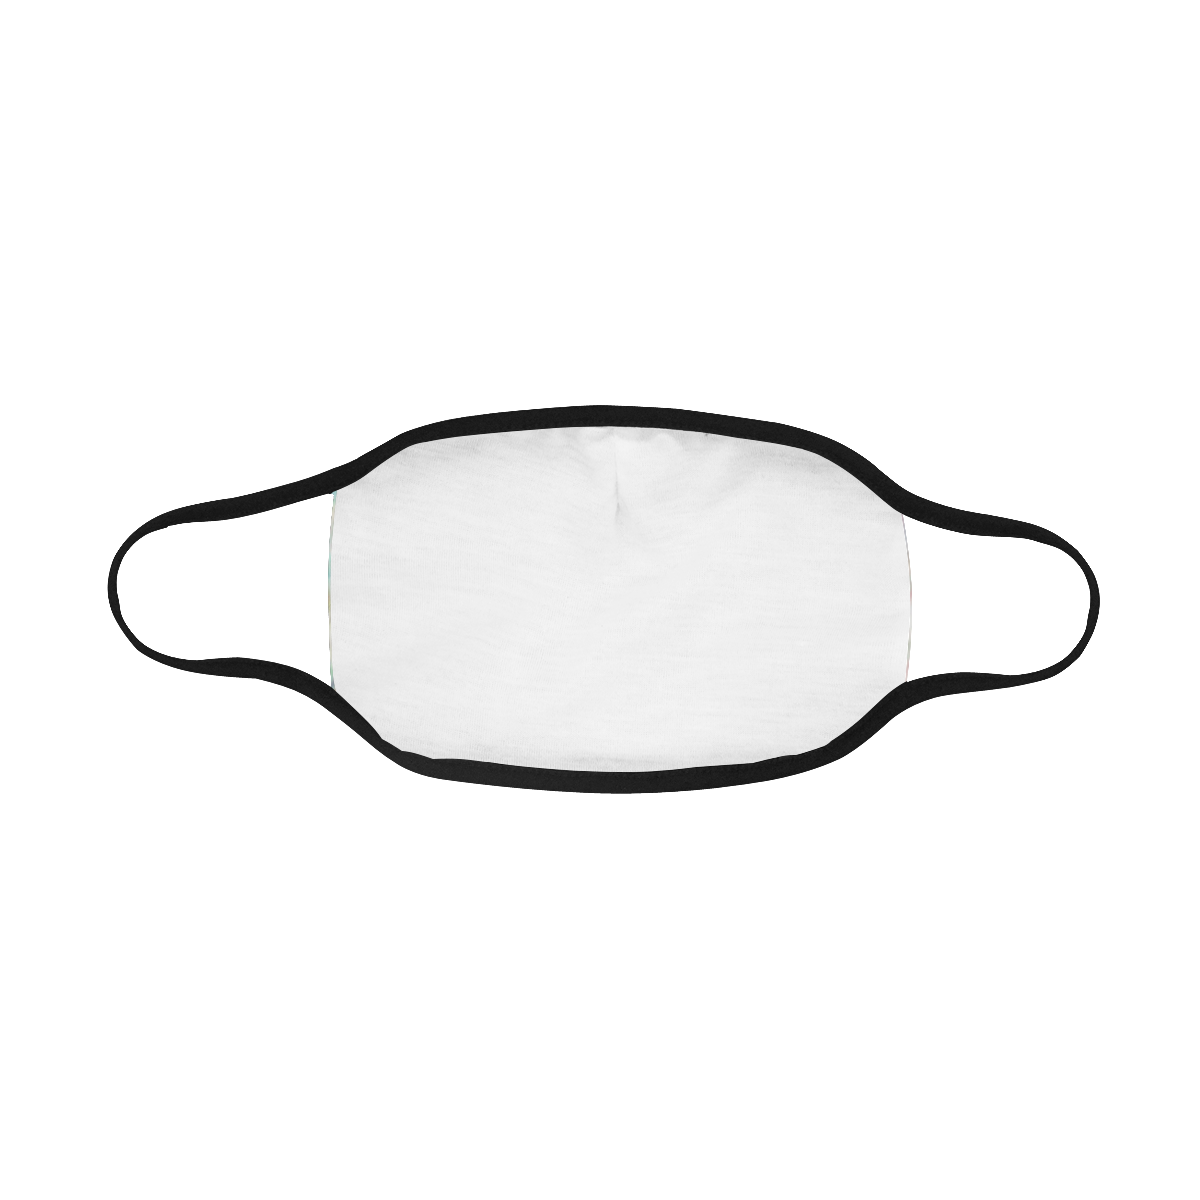 Sunrise of Sunset Face Mask Mouth Mask in One Piece (2 Filters Included) (Model M02) (Non-medical Products)